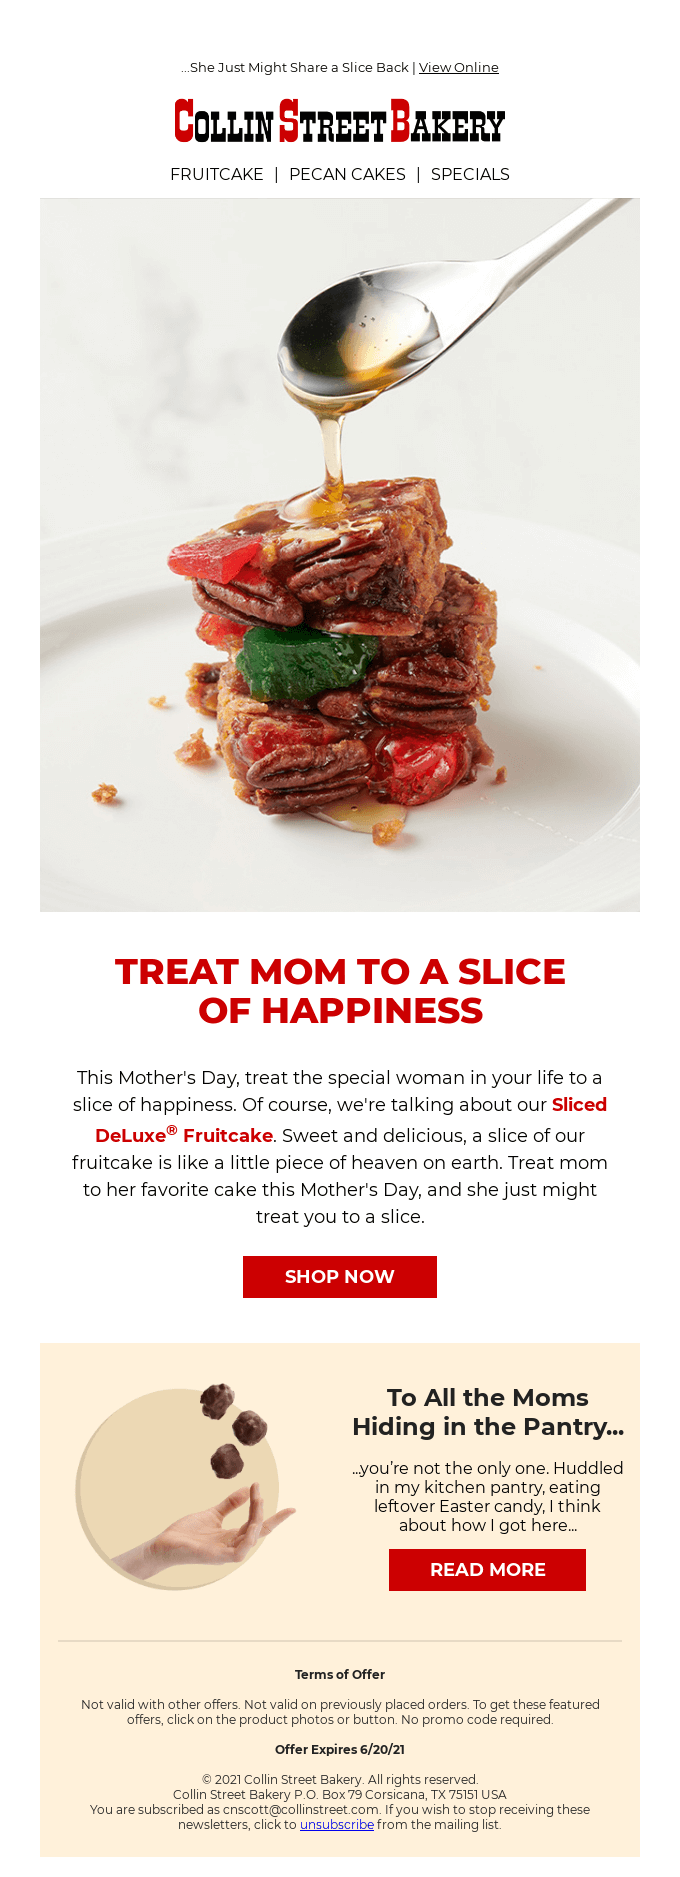 Treat Mom to a Slice of Happiness